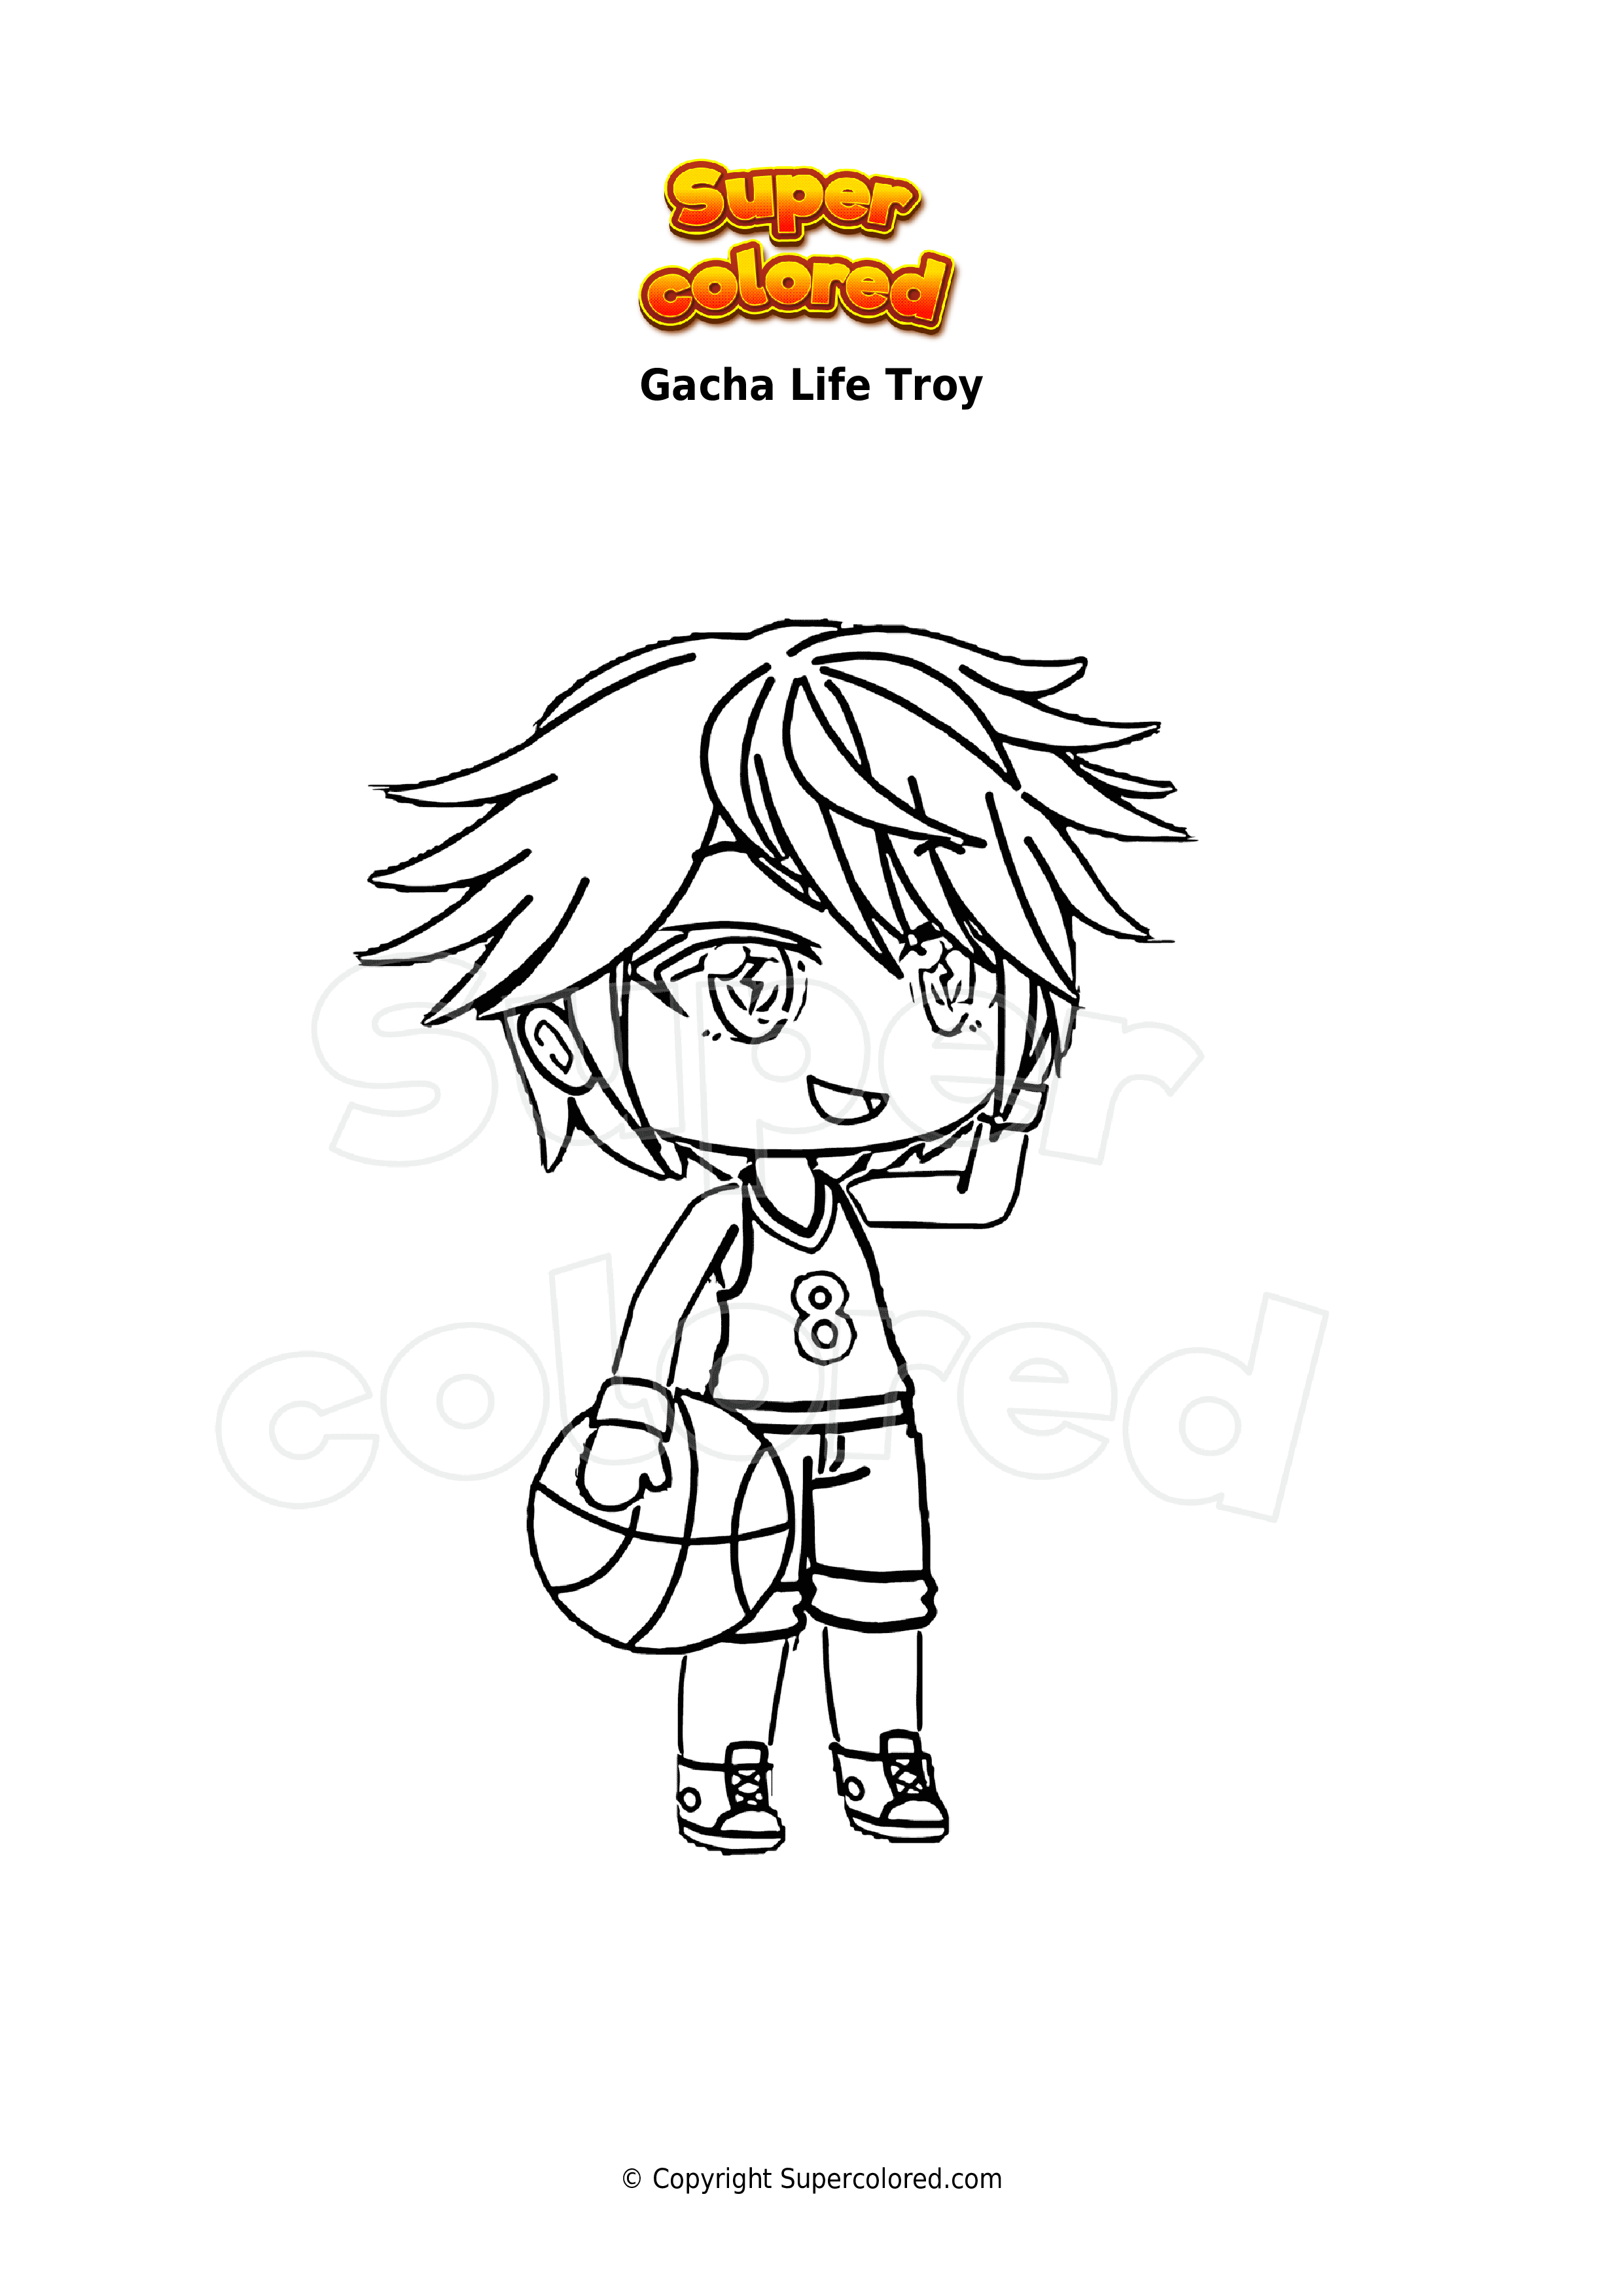 Coloring Pages   Gacha Life   Supercolored